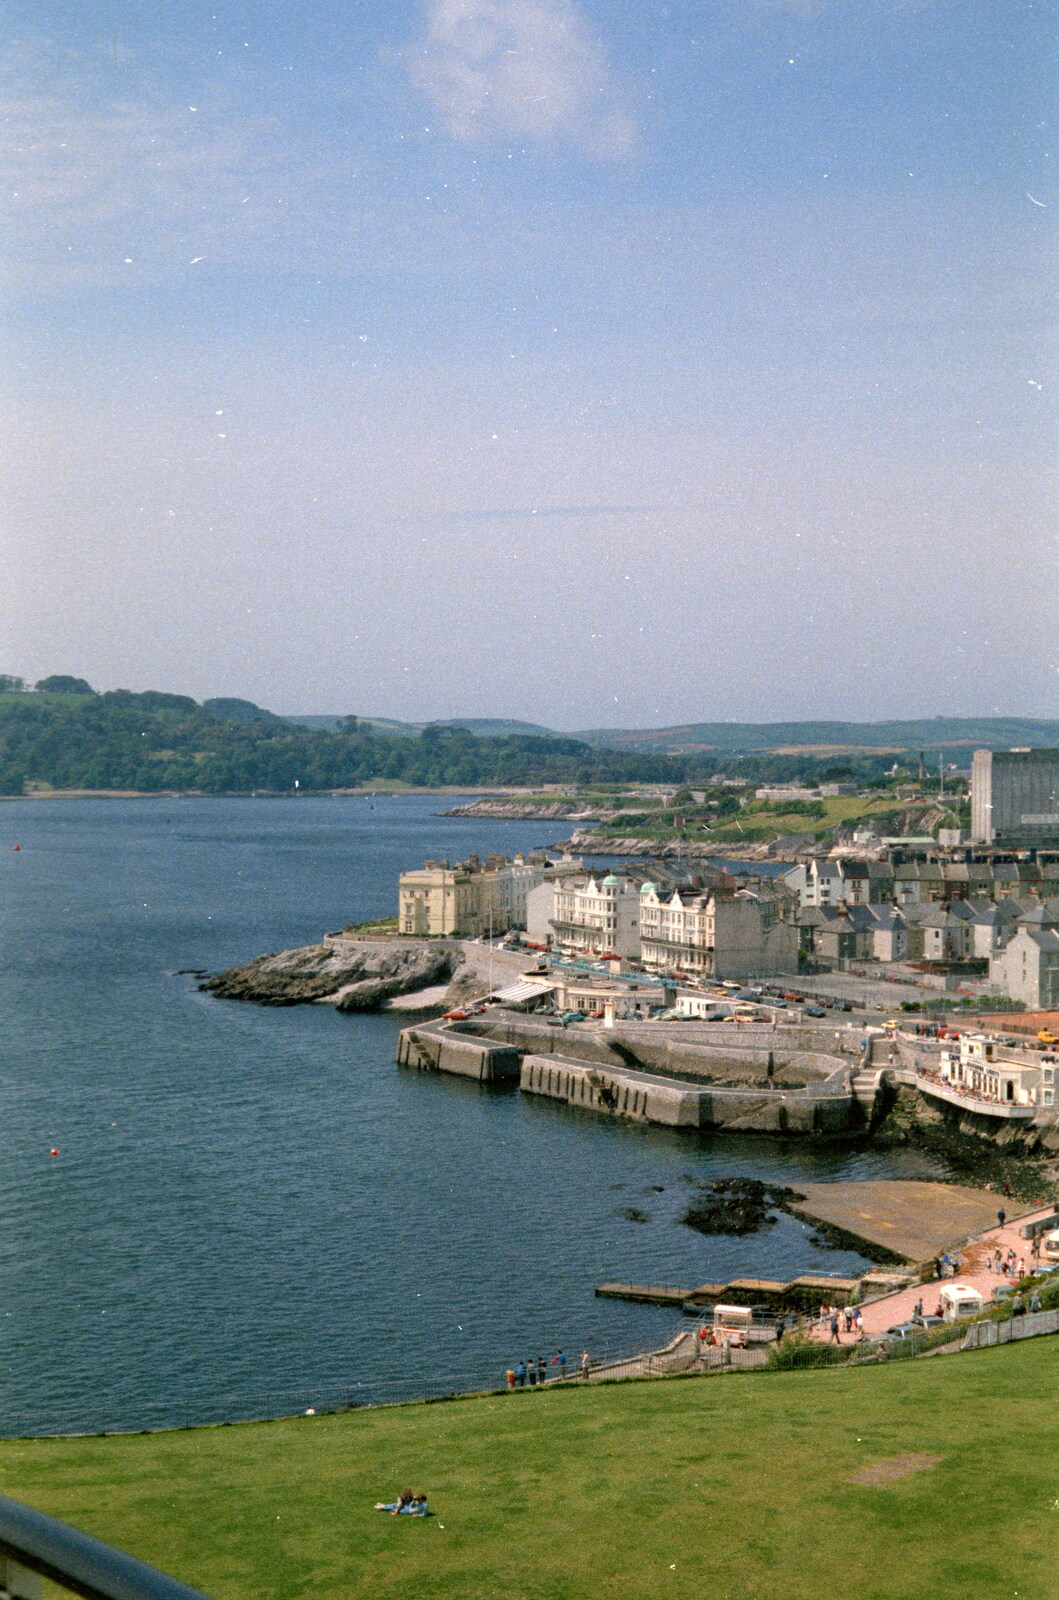 West Hoe from Uni: A Plymouth Hoe Panorama, Plymouth, Devon - 7th May 1986